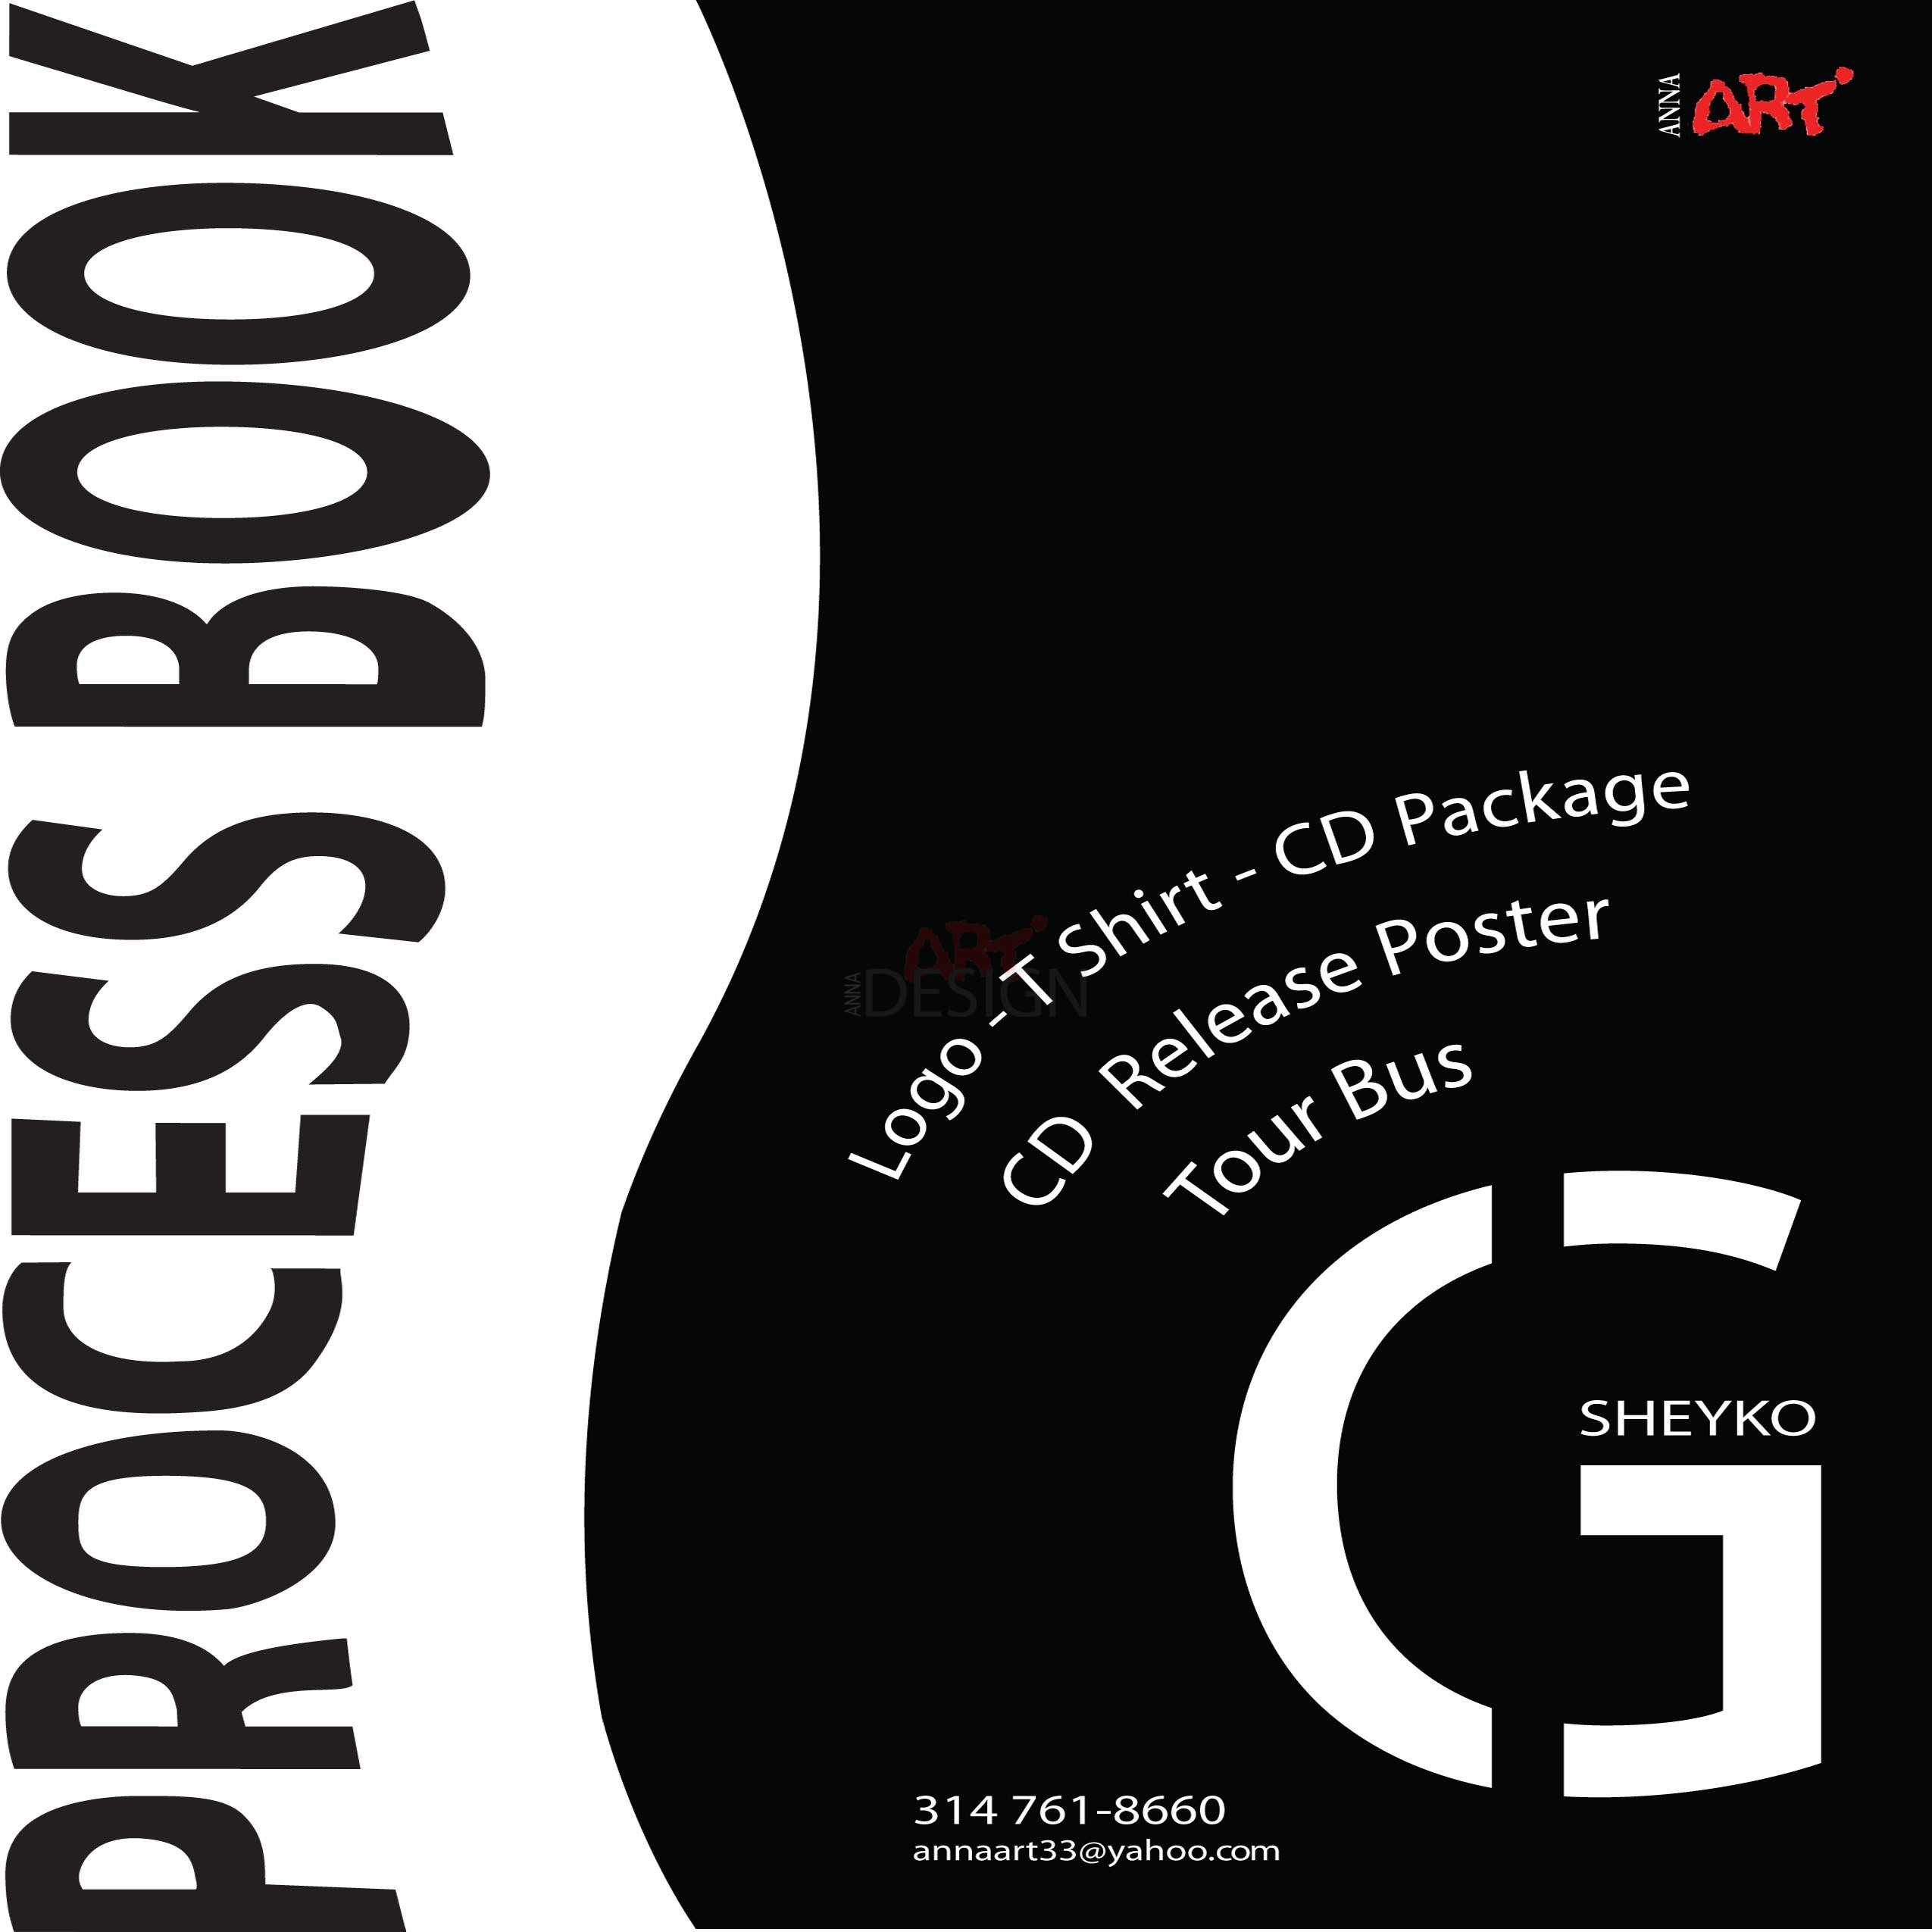 Cover Page for process book by Ganna Sheyko / Anna Art Design